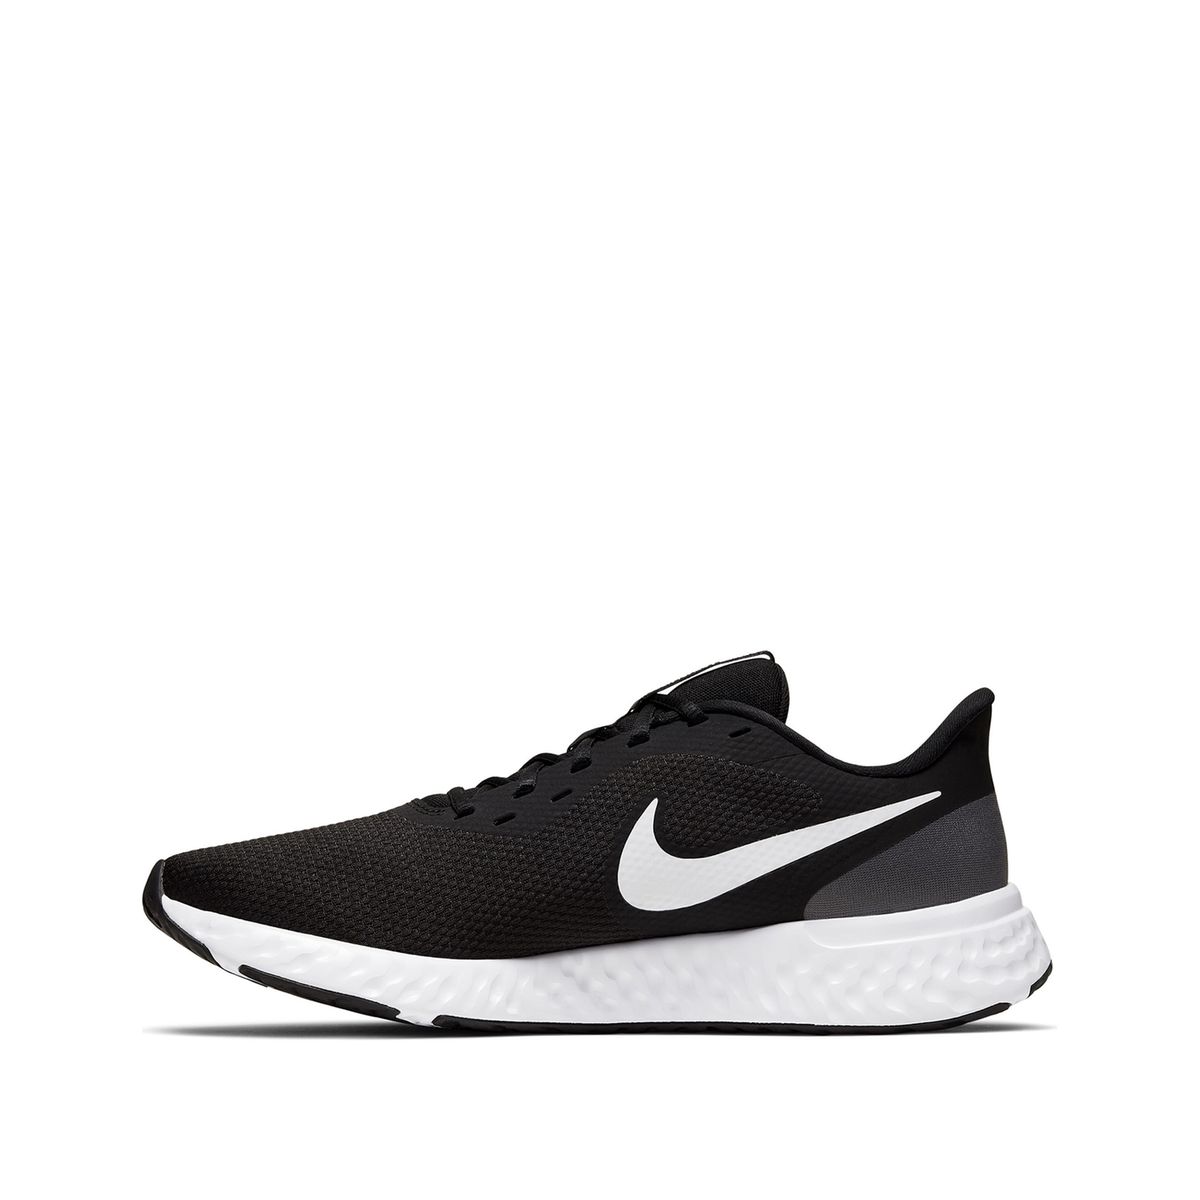 Nike Chaussures Fitness Femme Revolution W Nike TightR, 55% OFF